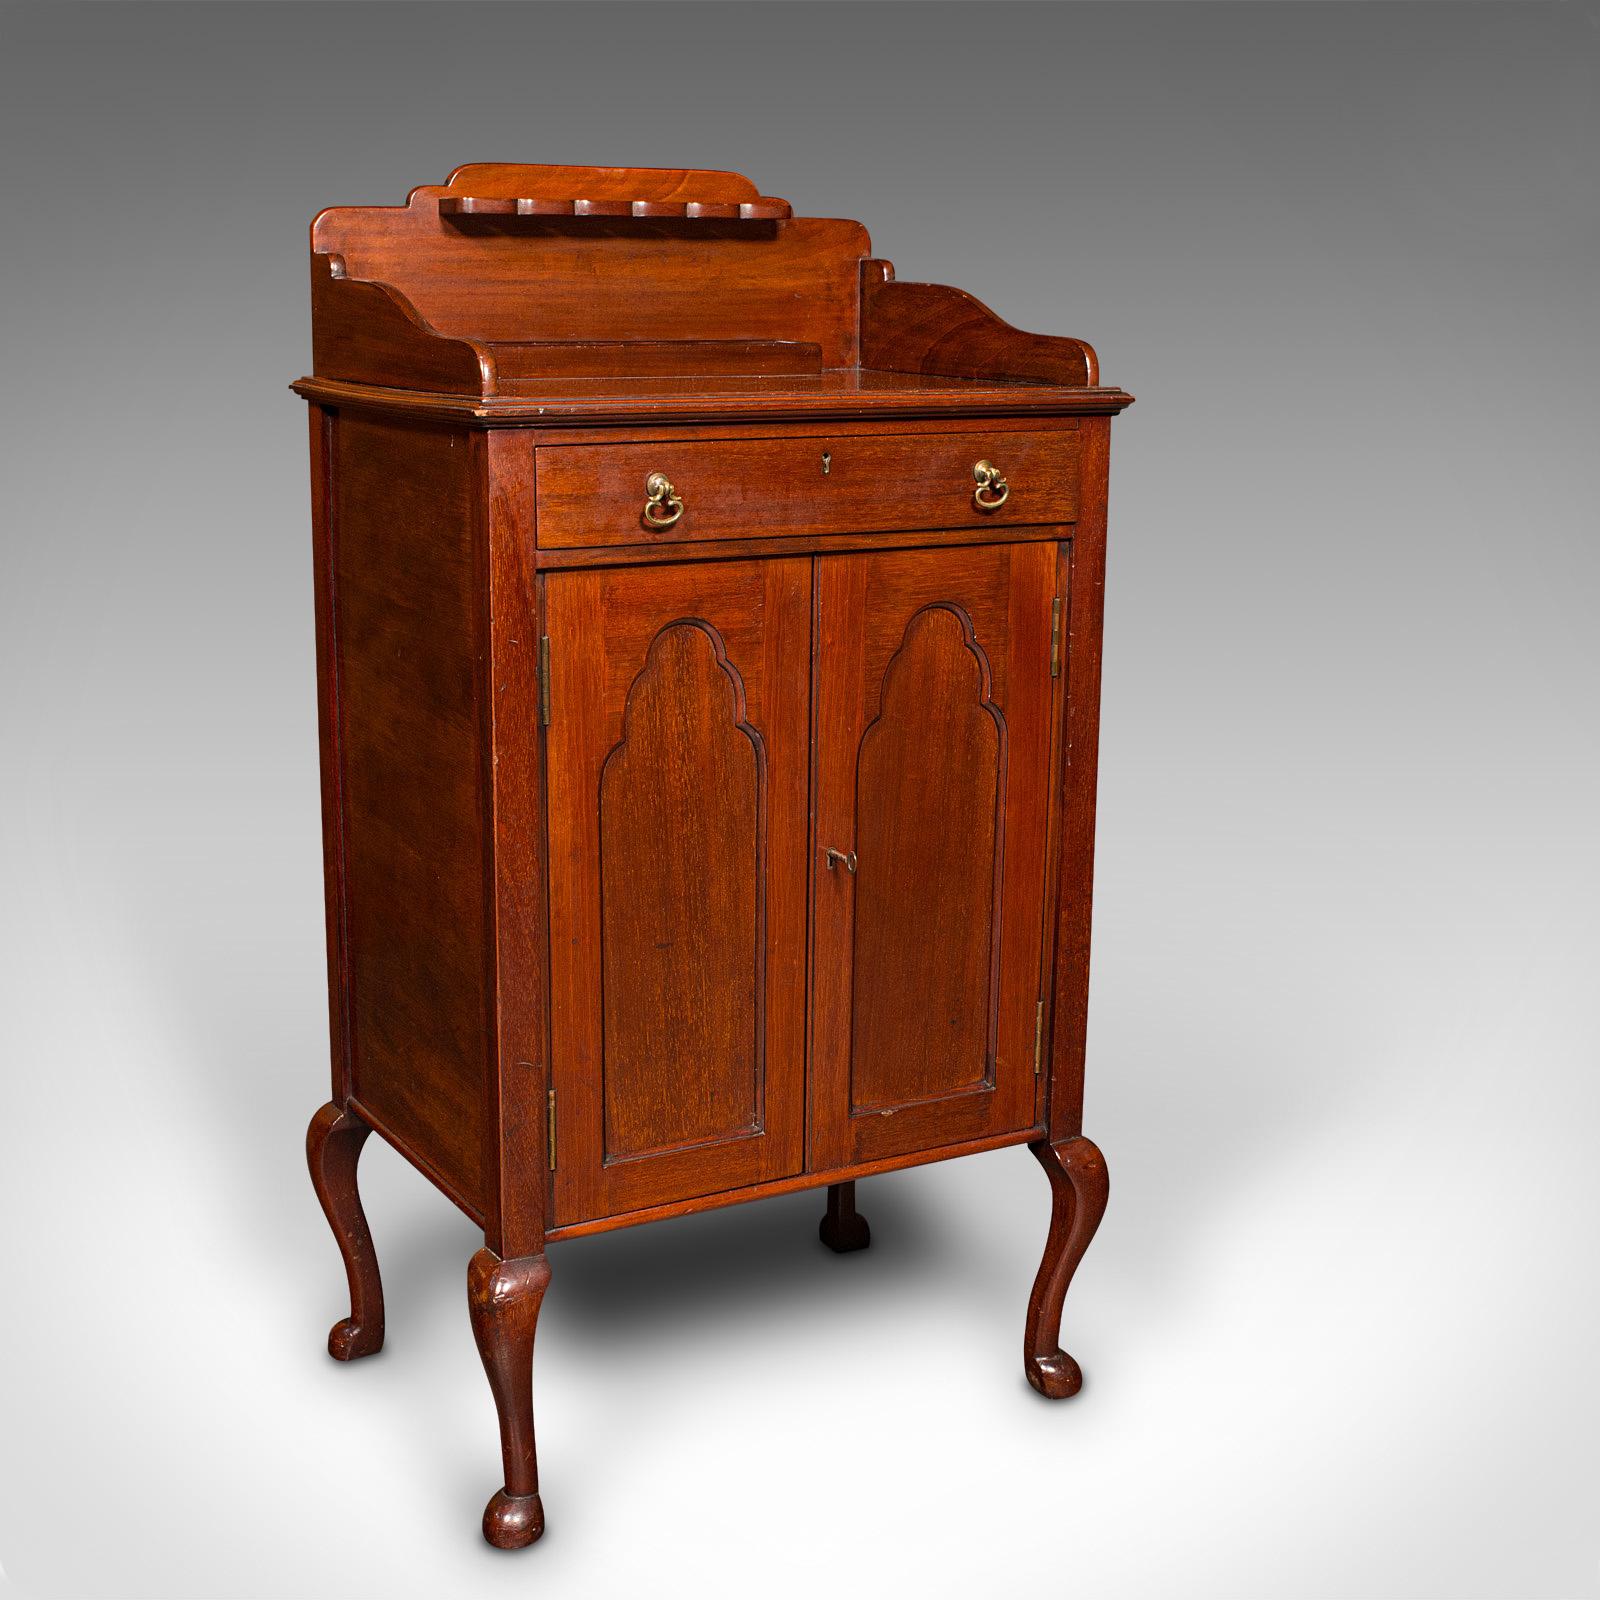 This is an antique gentleman's side cabinet. An English, mahogany club lounge stand, dating to the Edwardian period, circa 1910.

Well appointed and attractive stand, ideal for relaxing beside a warm fire
Displays a desirable aged patina and in good